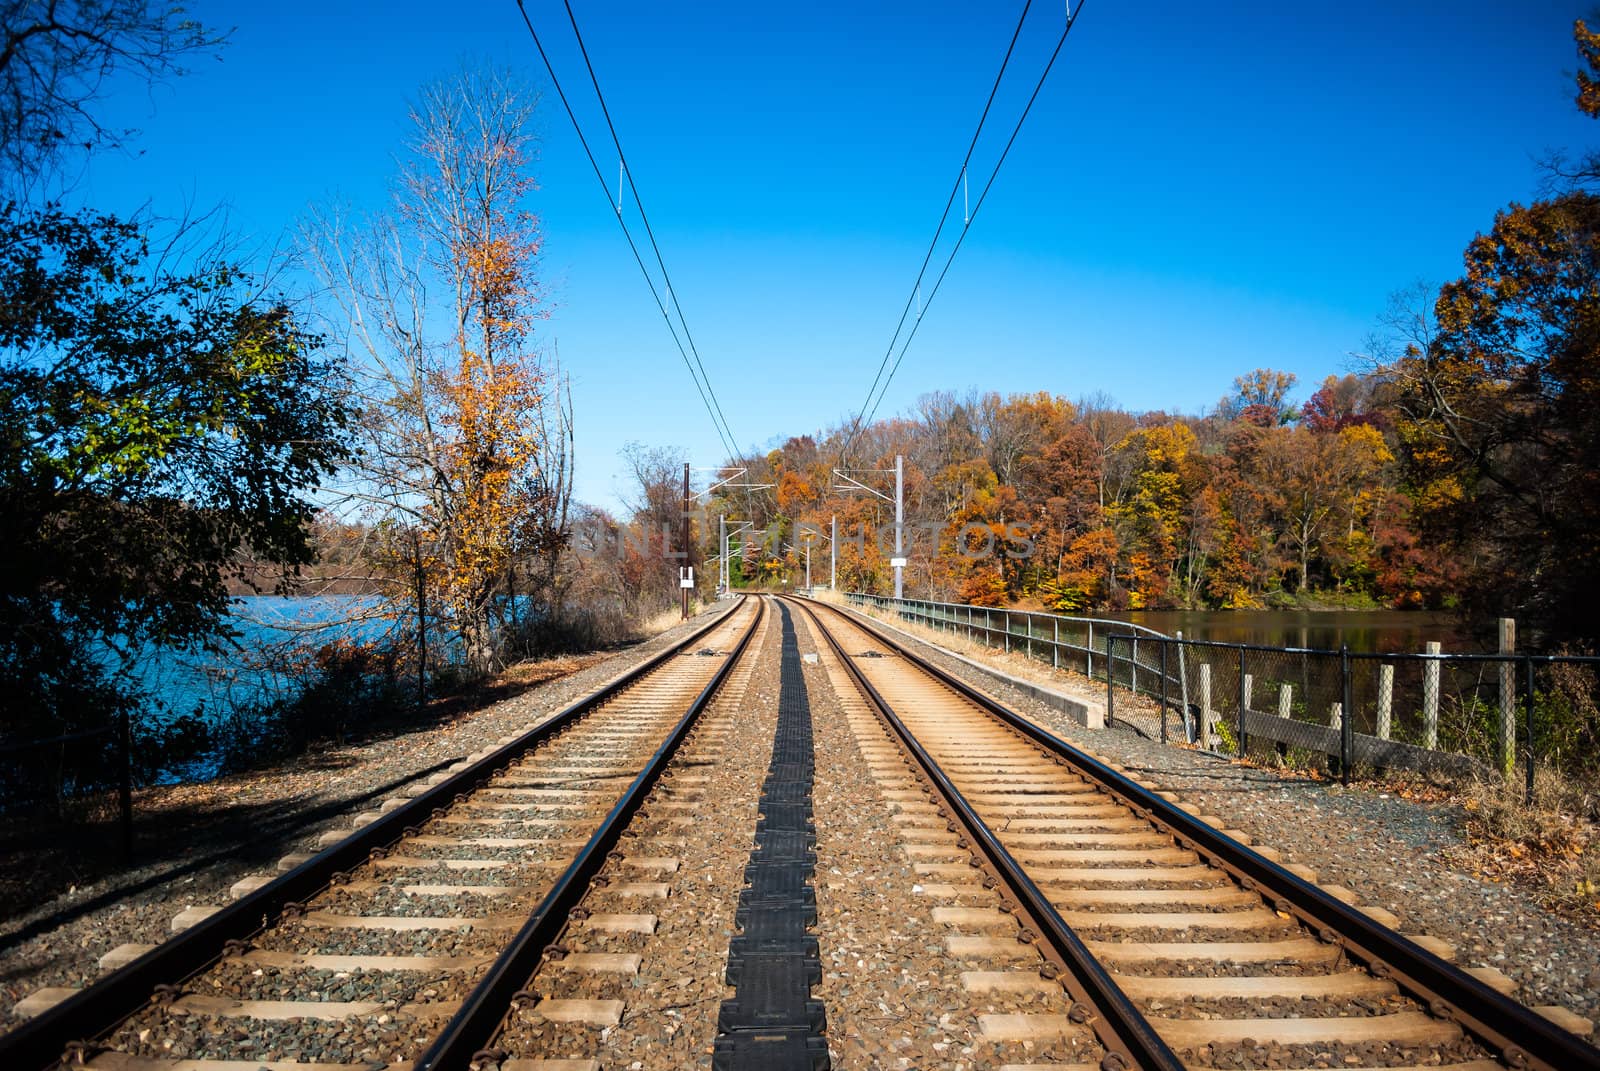 Photograph of double track railroad lines with vanishing perspective taken in autums with overhead catenary lines.